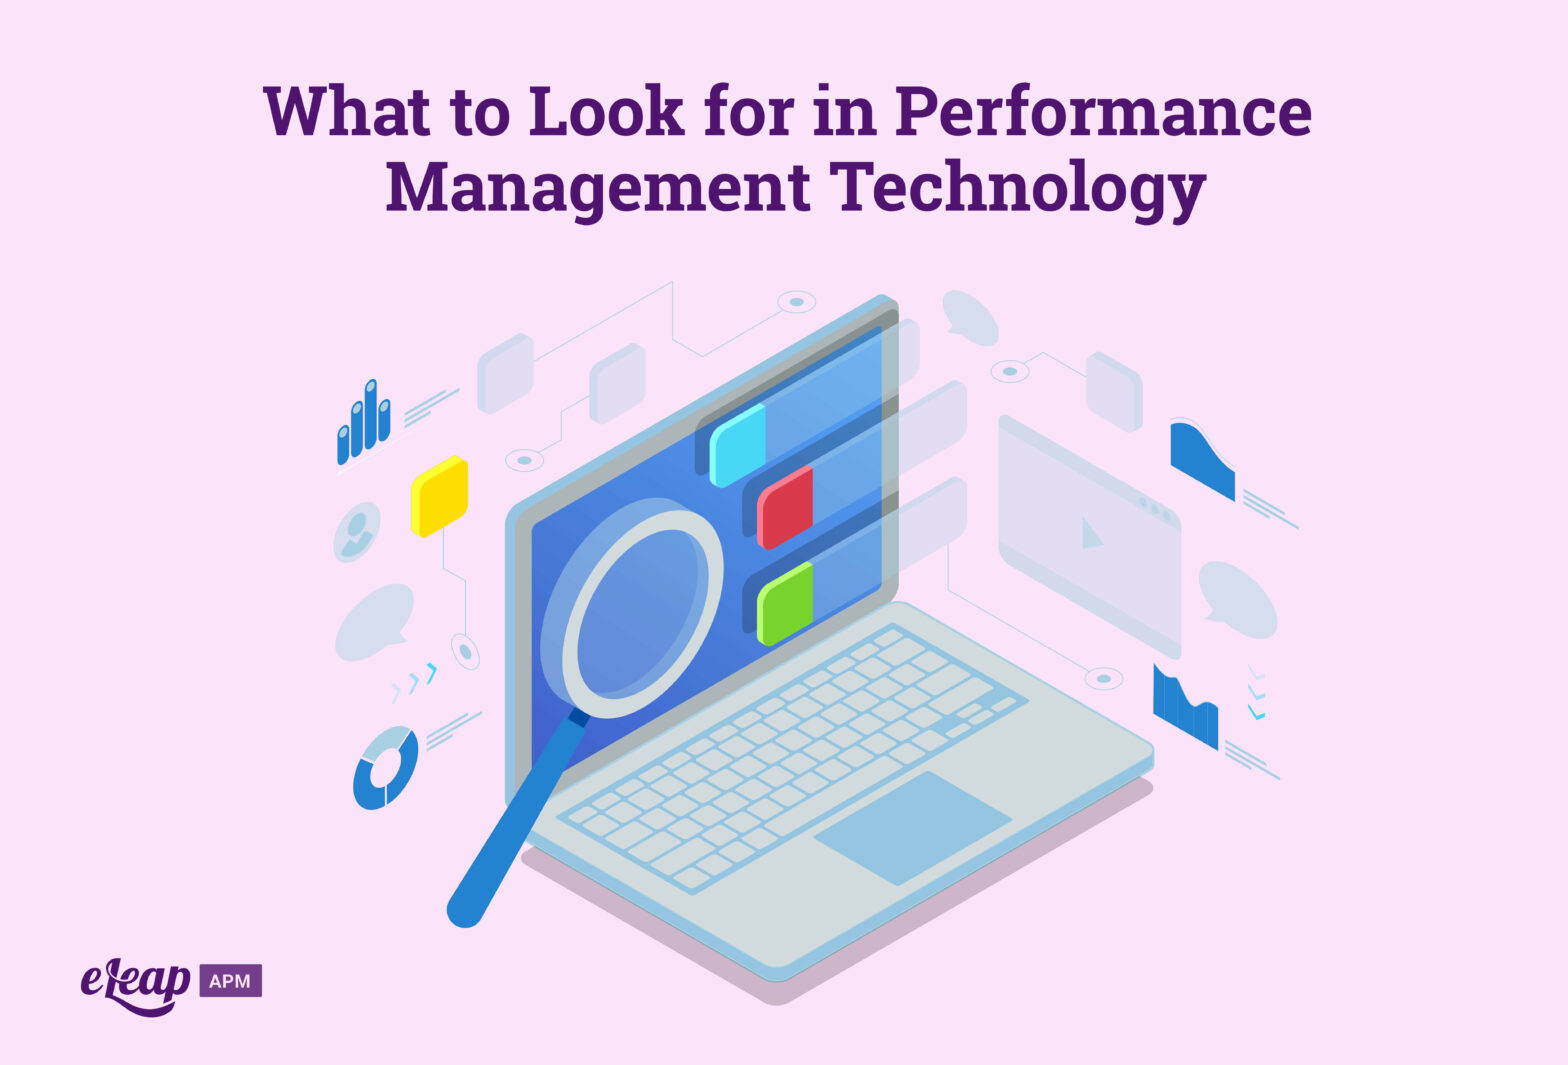 What to Look for in Performance Management Technology